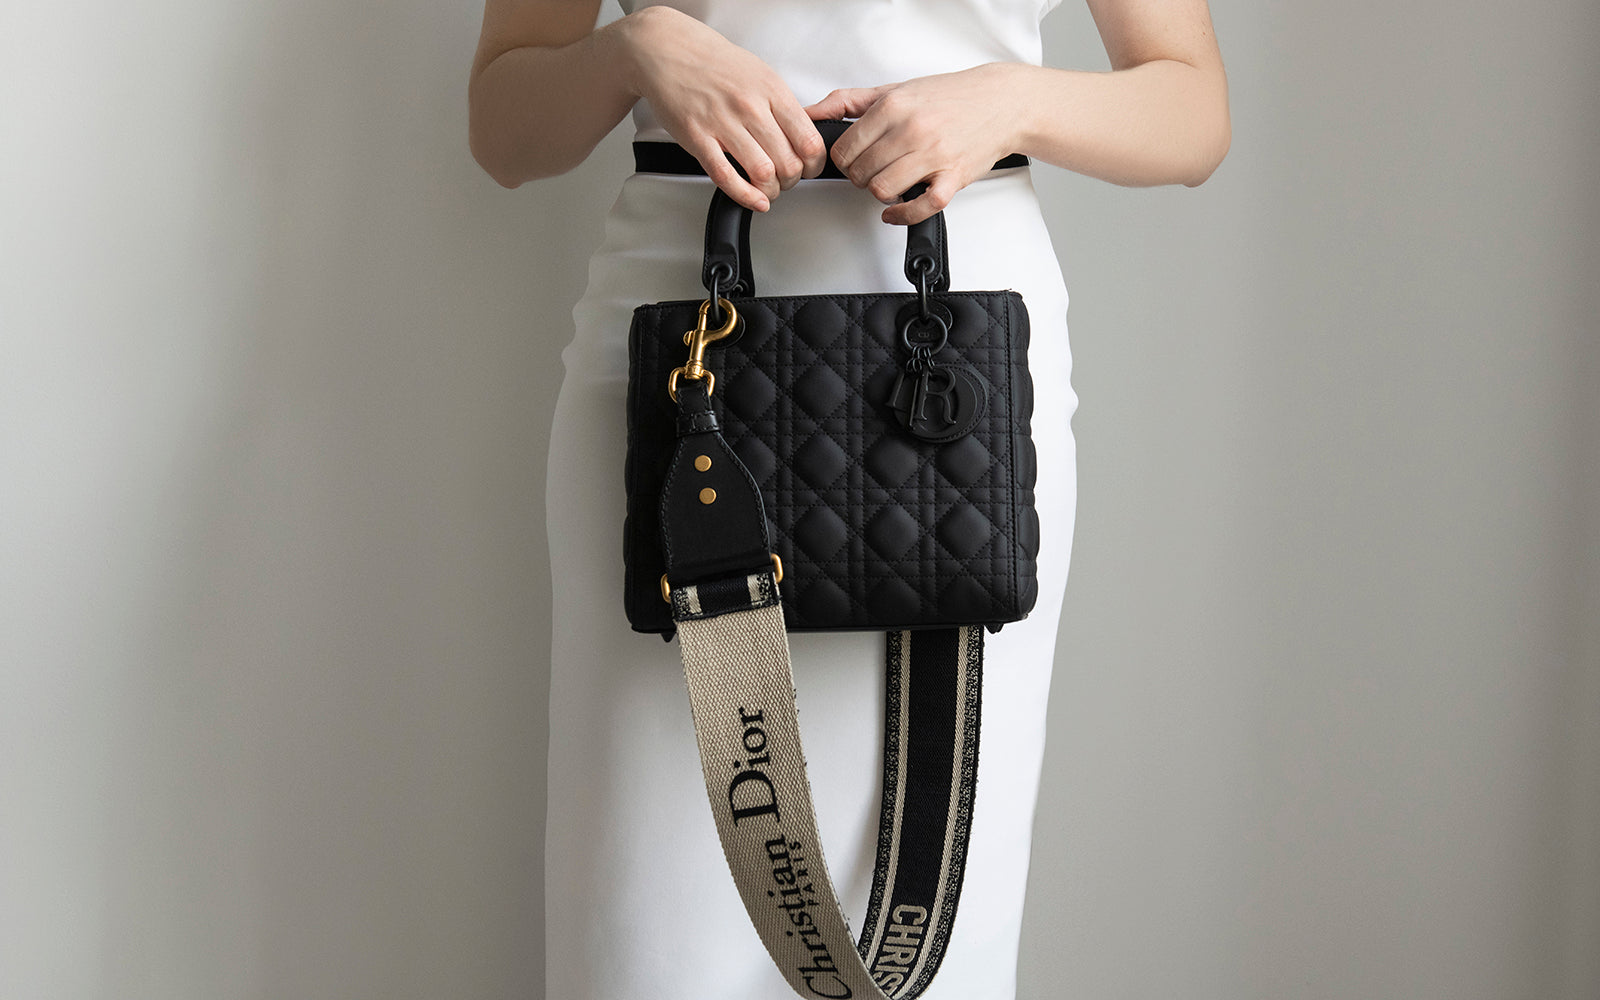 Shop authentic preowned Dior handbags and accessories